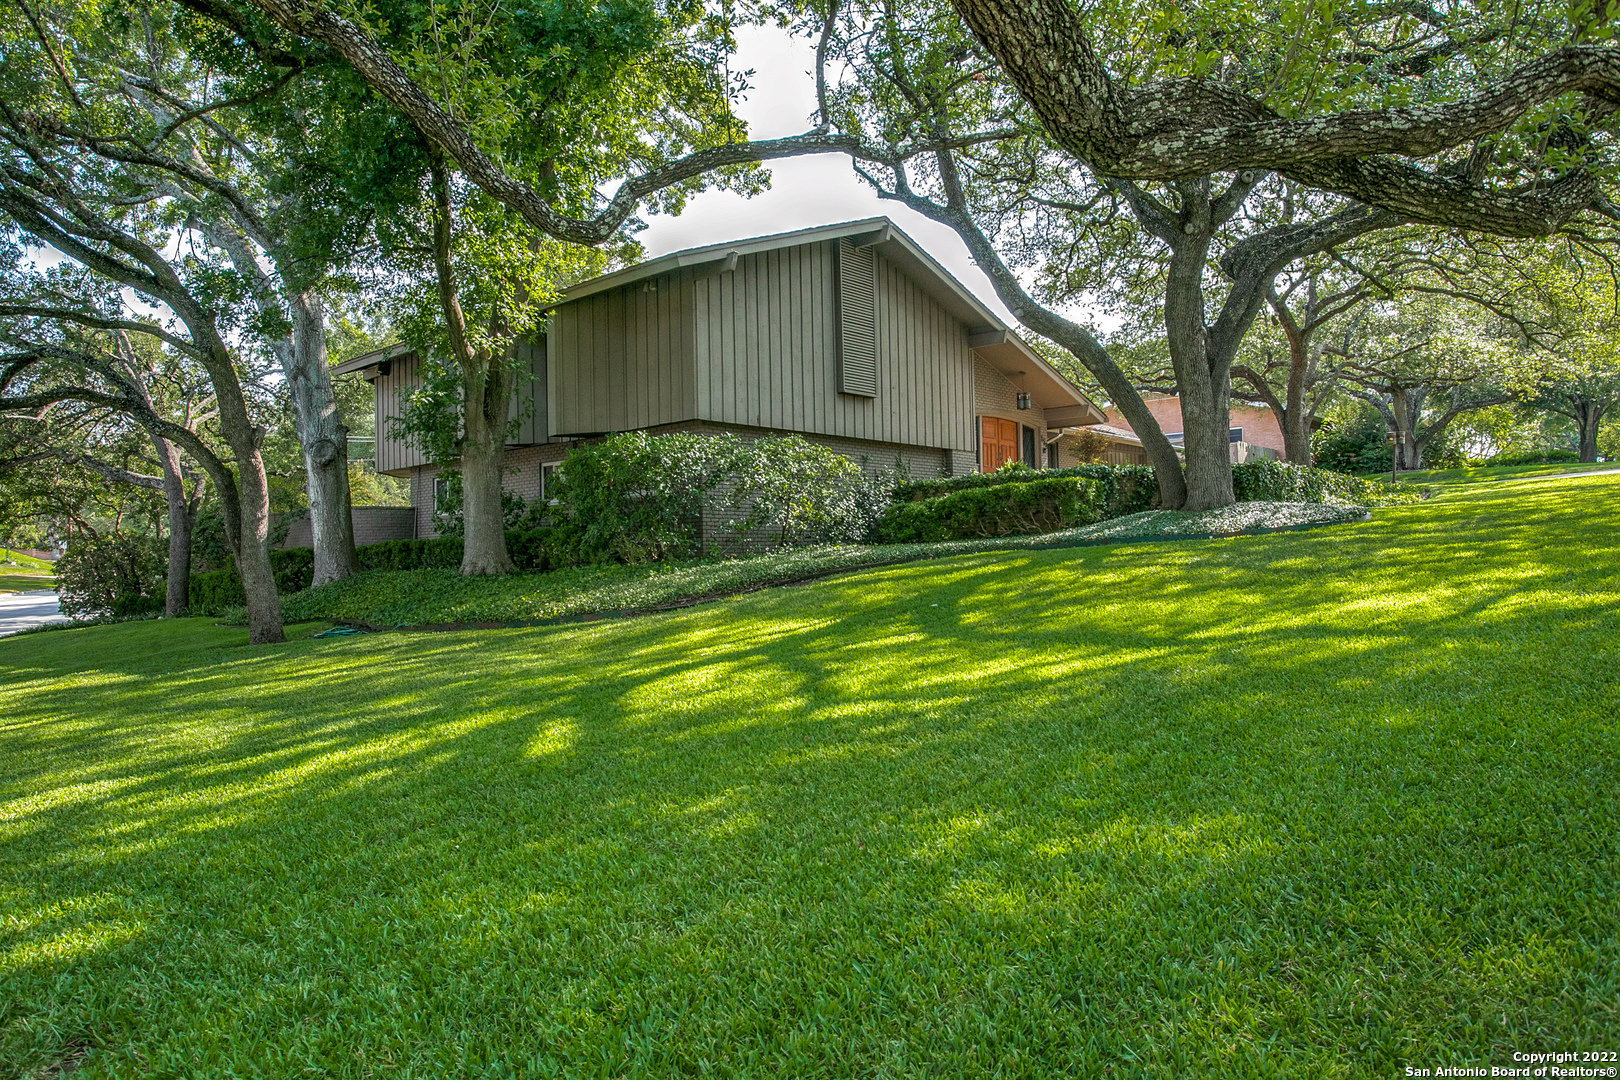 Great opportunity for a well-cared-for, one-owner mid-century modern on expansive, shady, corner lot in AHISD. Spacious living areas and formal dining room ideal for gathering. Living room has soaring ceilings, fireplace. Family room is light-filled with back yard views. Palmer Todd kitchen with breakfast room with pool views. Split level floor plan. Primary suite and private study/sitting area on upper level has abundant storage and built-ins and makes a fabulous owner's retreat. 2 Secondary bedrooms, bath and game room on lover level with walk-out to back yard. Updated double paned windows throughout. 4th Bedroom with full bath on main level. Private back yard with sparkling pool, patio and pergola perfect for relaxing and entertaining.